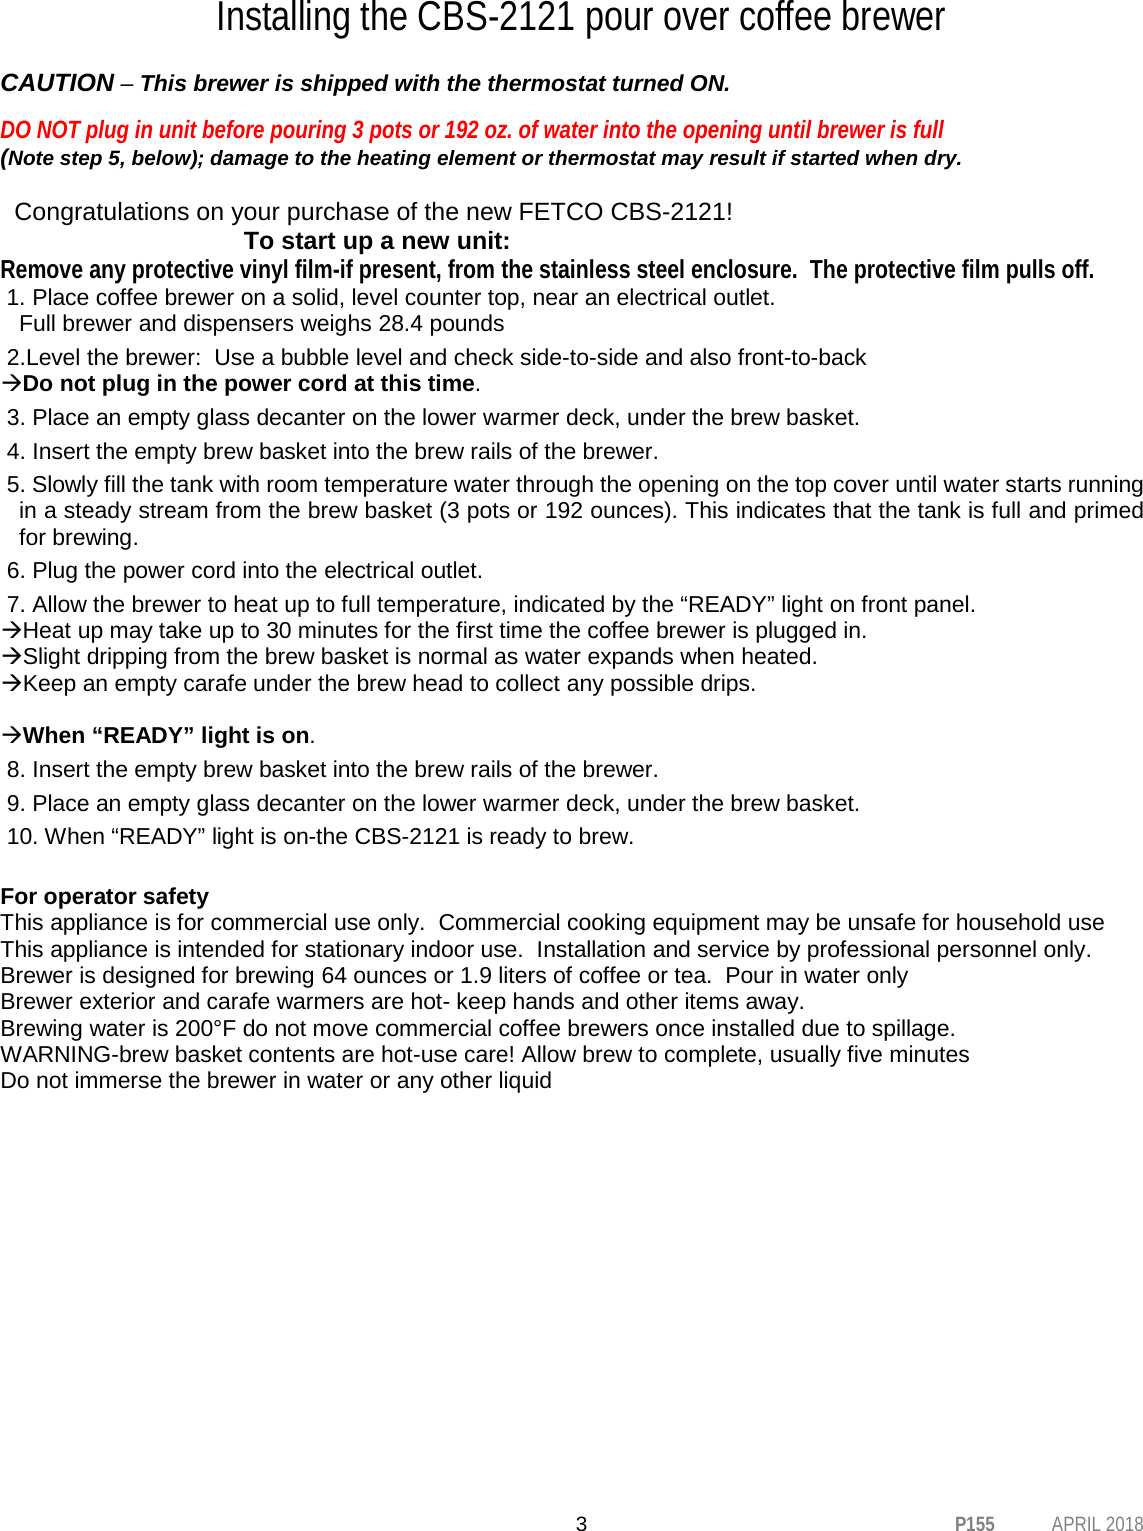 Page 3 of 10 - Cbs2121-user-manual